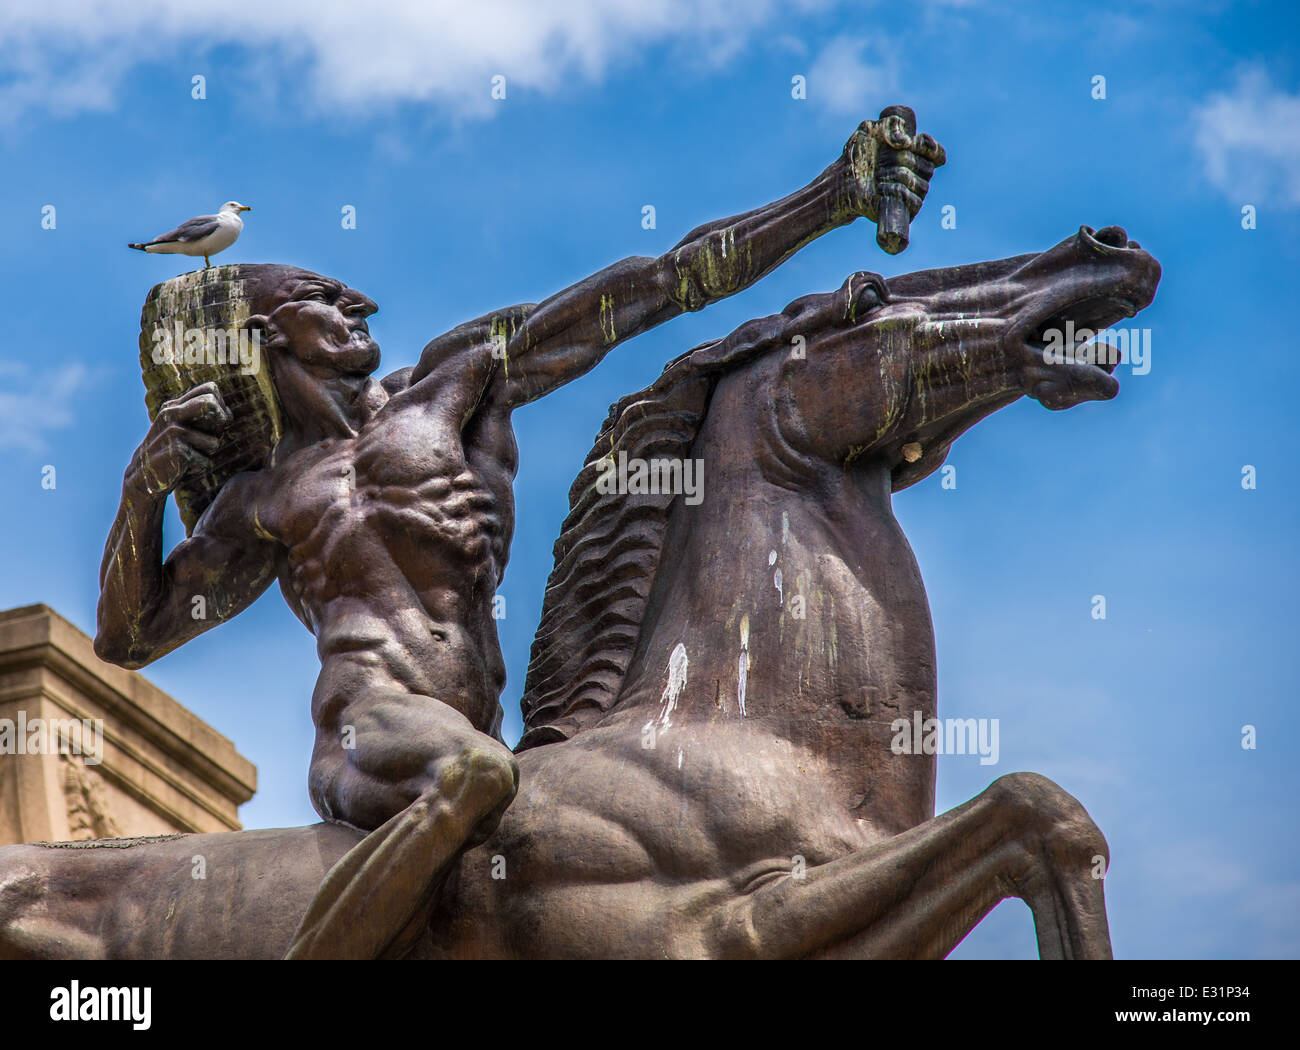 A bird sits on the head of The Bowman a bronze statue located in Chicago, USA at the intersection of Congress Drive and Michagan Ave. near Grant Park. Stock Photo